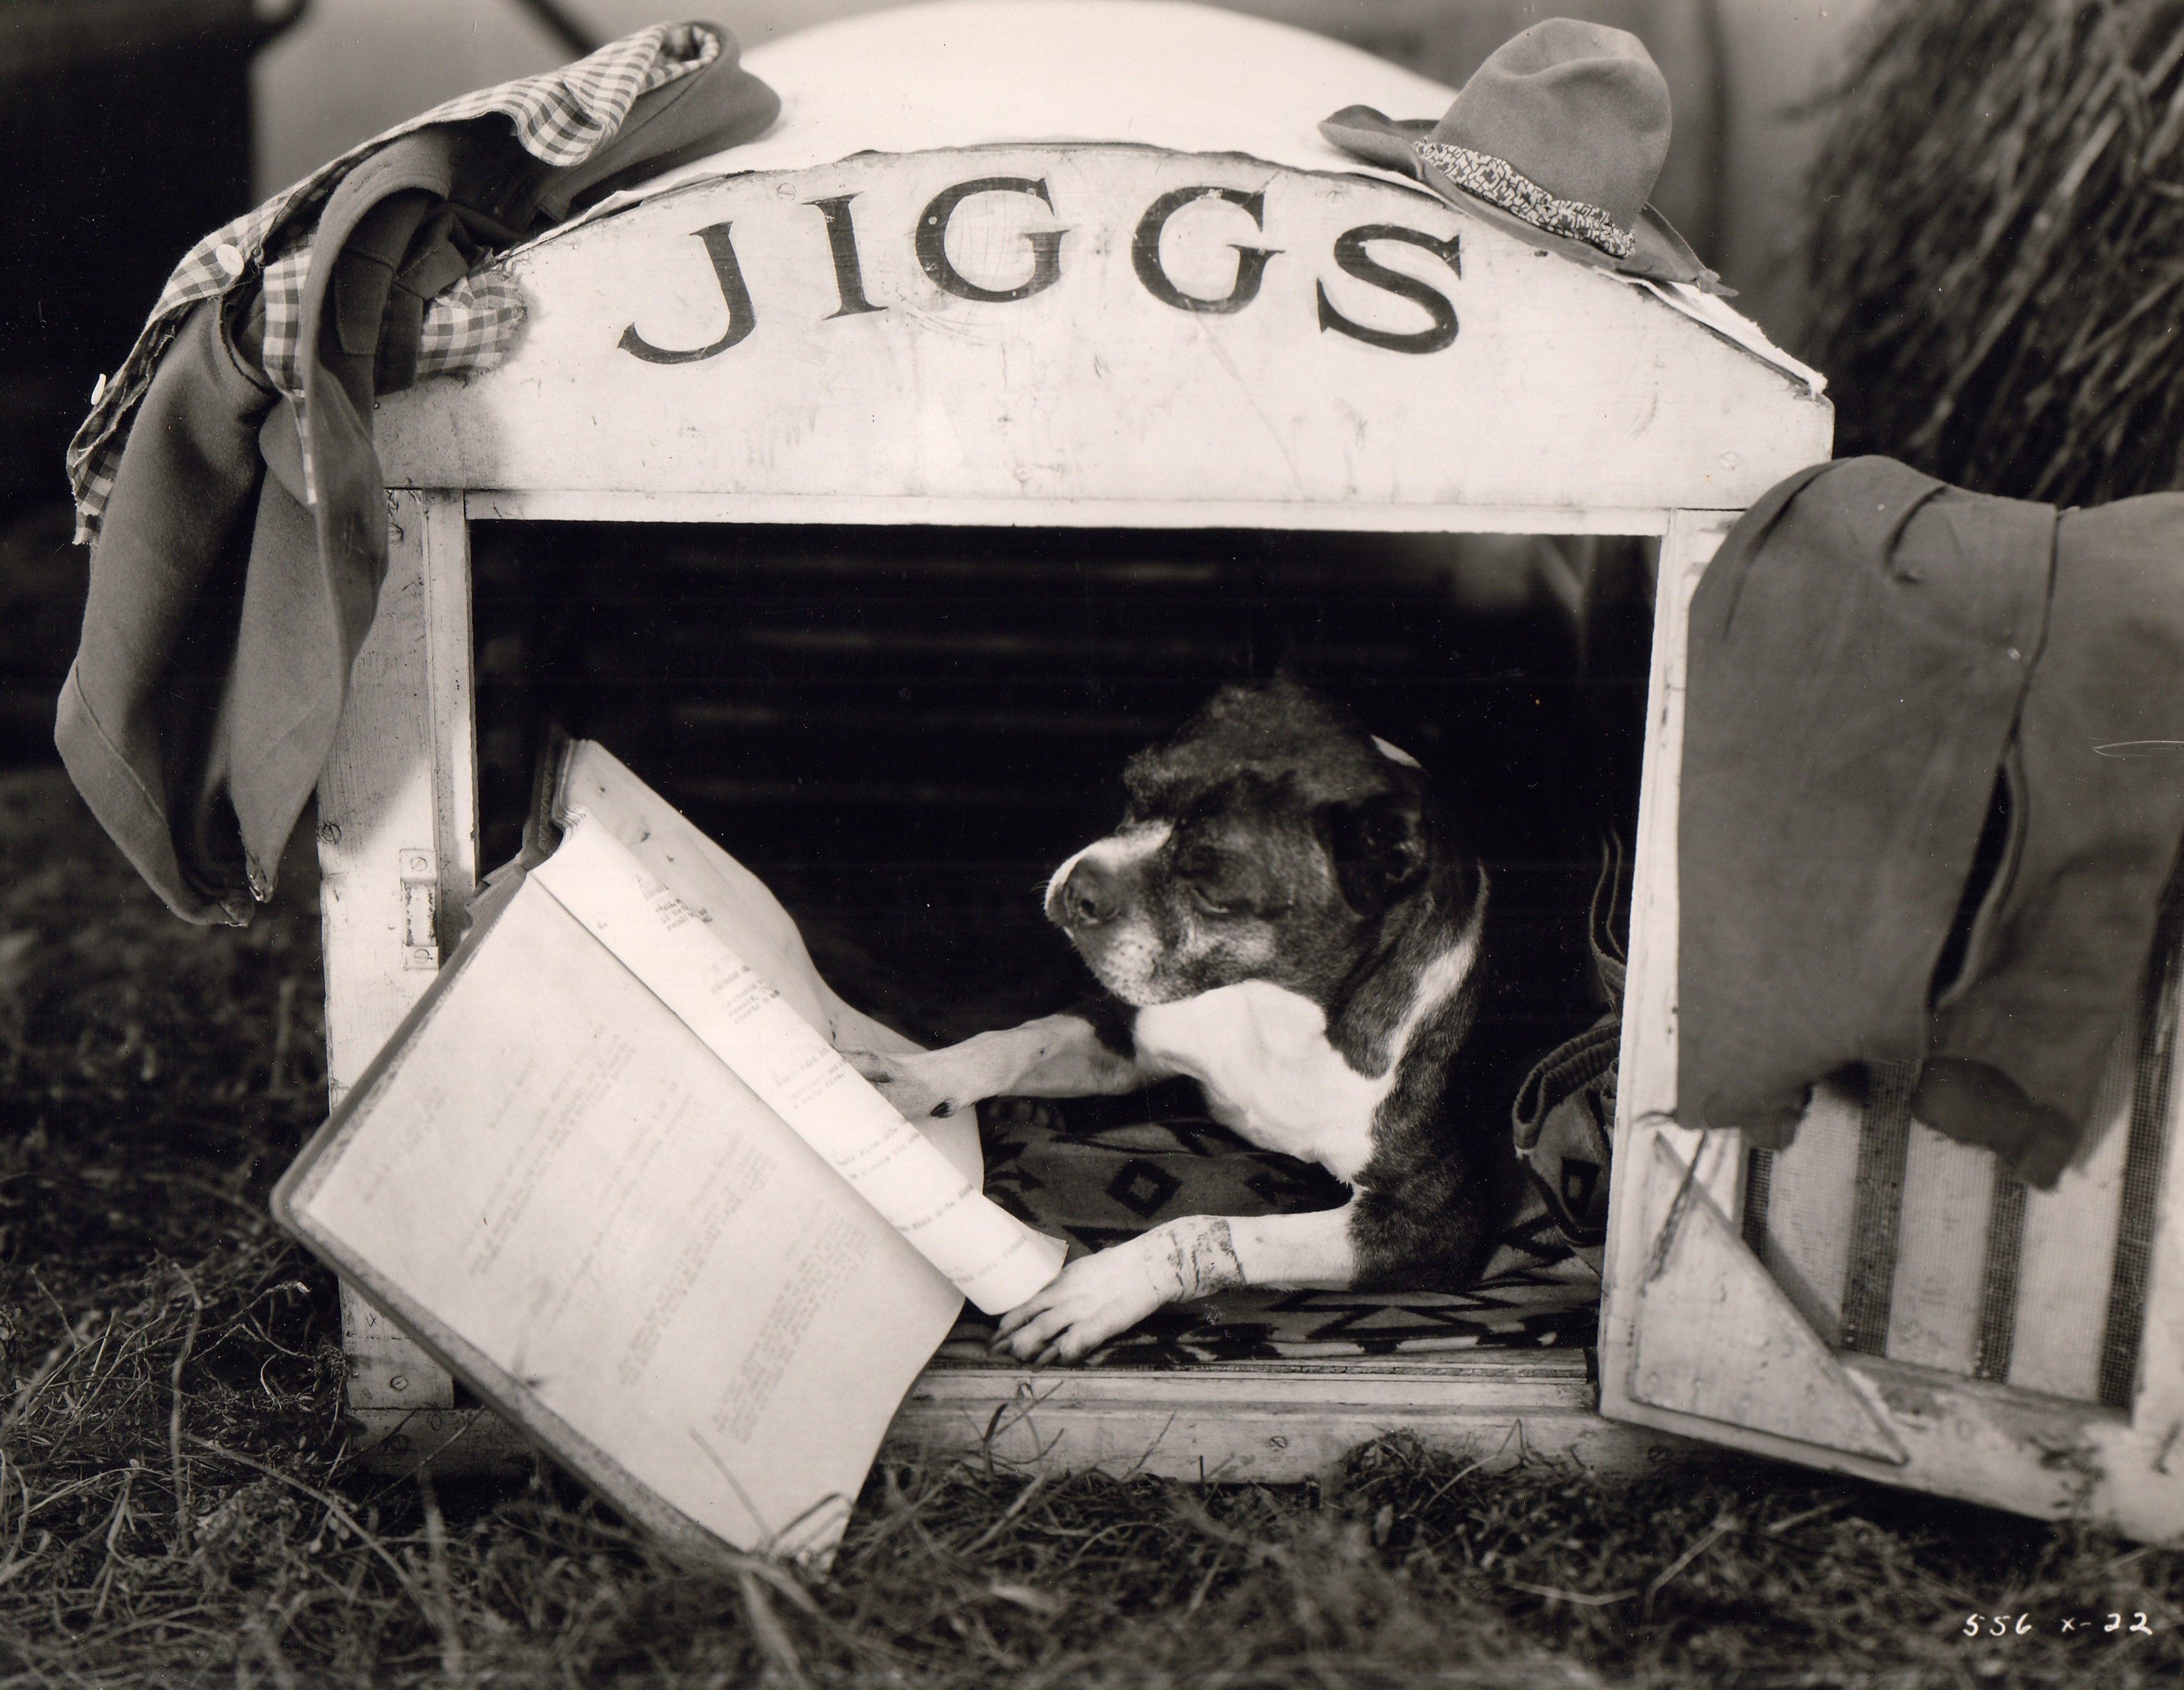 The 1930s Film Parodies Starring Only Dogs - Atlas Obscura